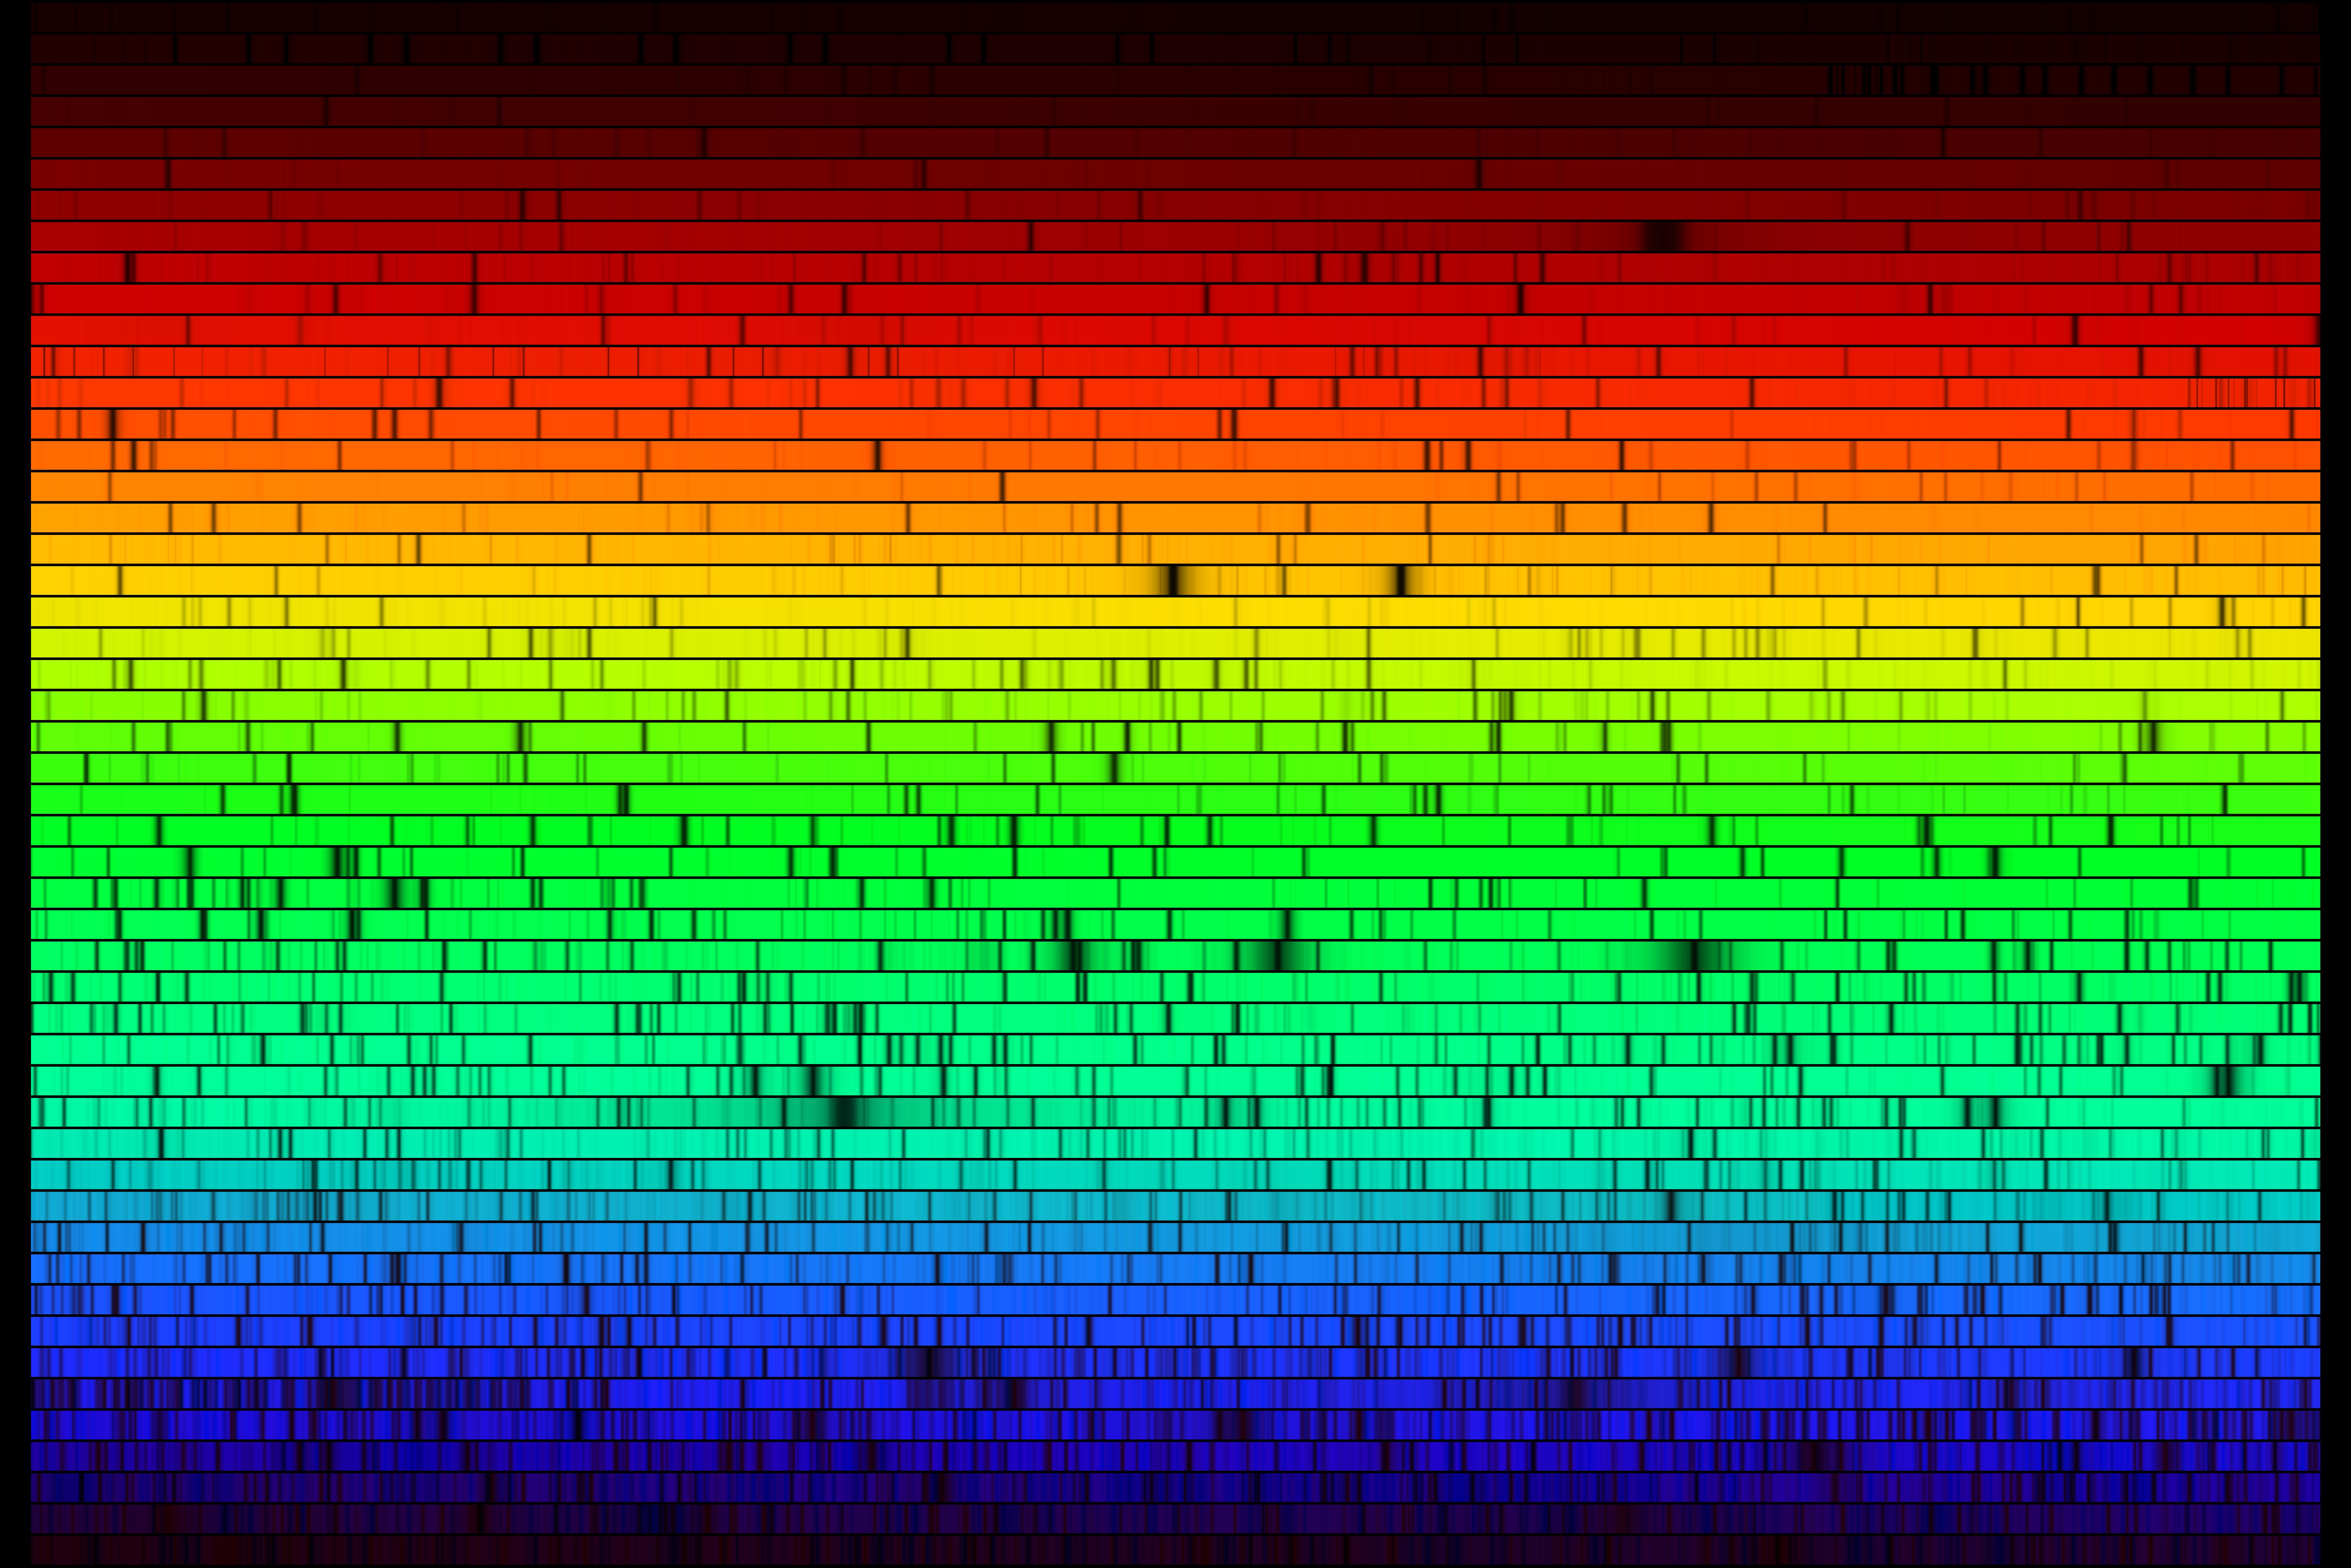 spectrum of the sun visible light